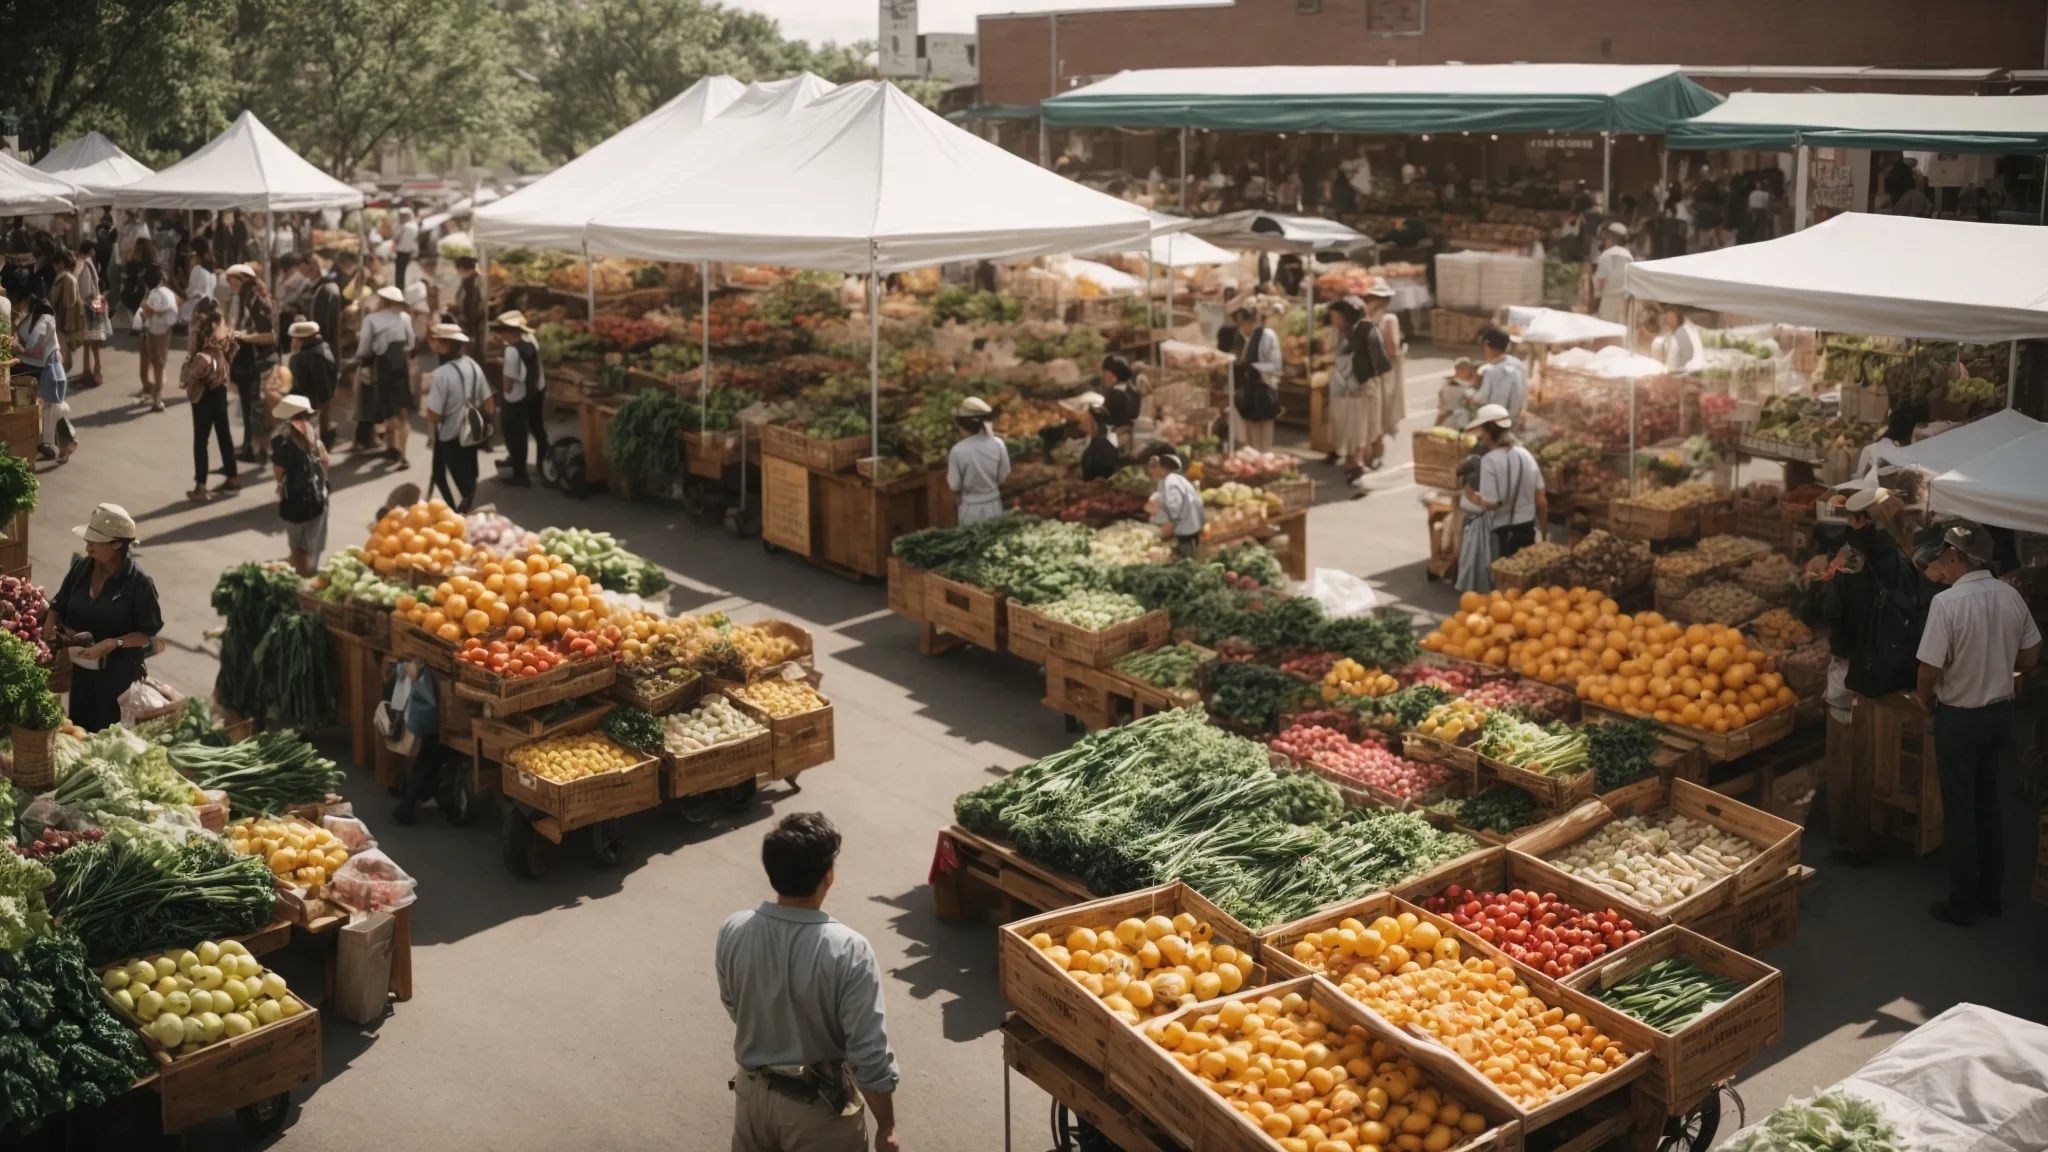 a bustling outdoor farmers' market with fresh local produce on display.